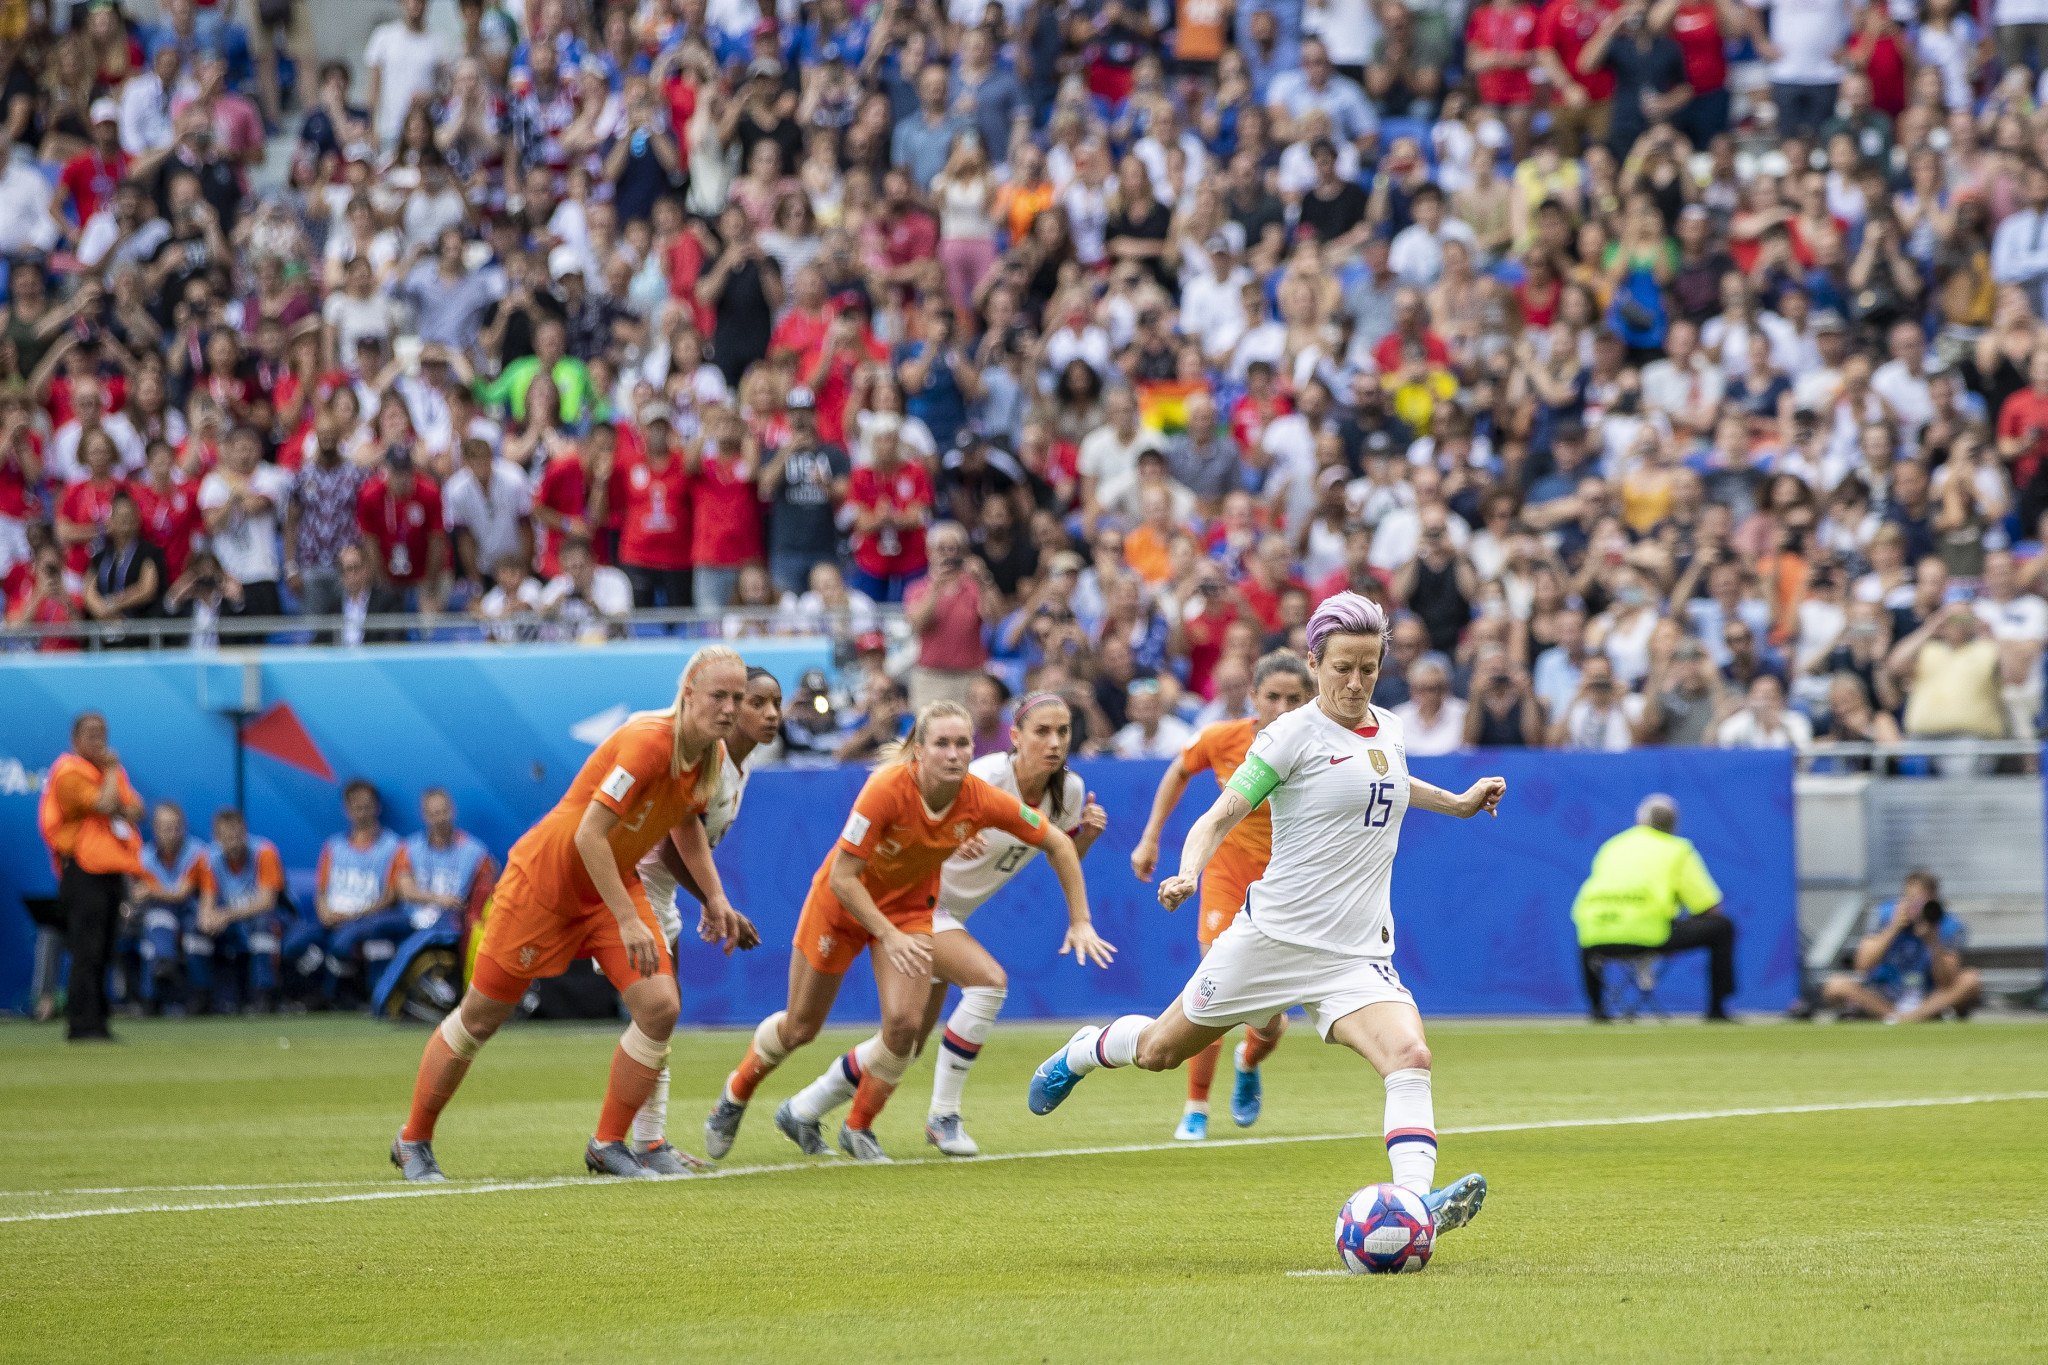 The United States earned their fourth title at the 2019 Women's World Cup in France ©Getty Images